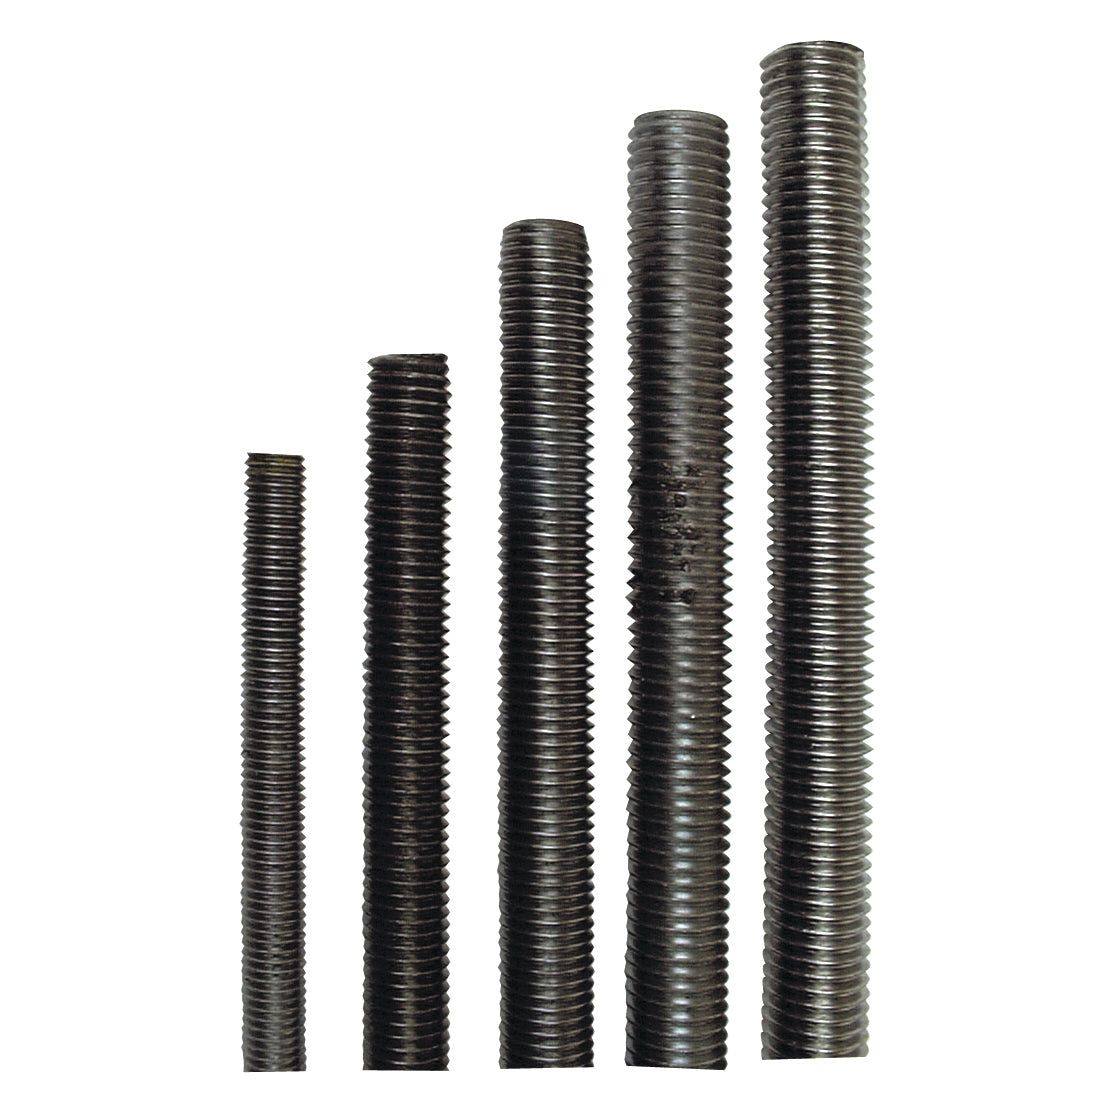 Metric Threaded Bar, Size:⌀24mm, Length: 1M, Tensile strength: 4.6.
 - S.8325 - Farming Parts